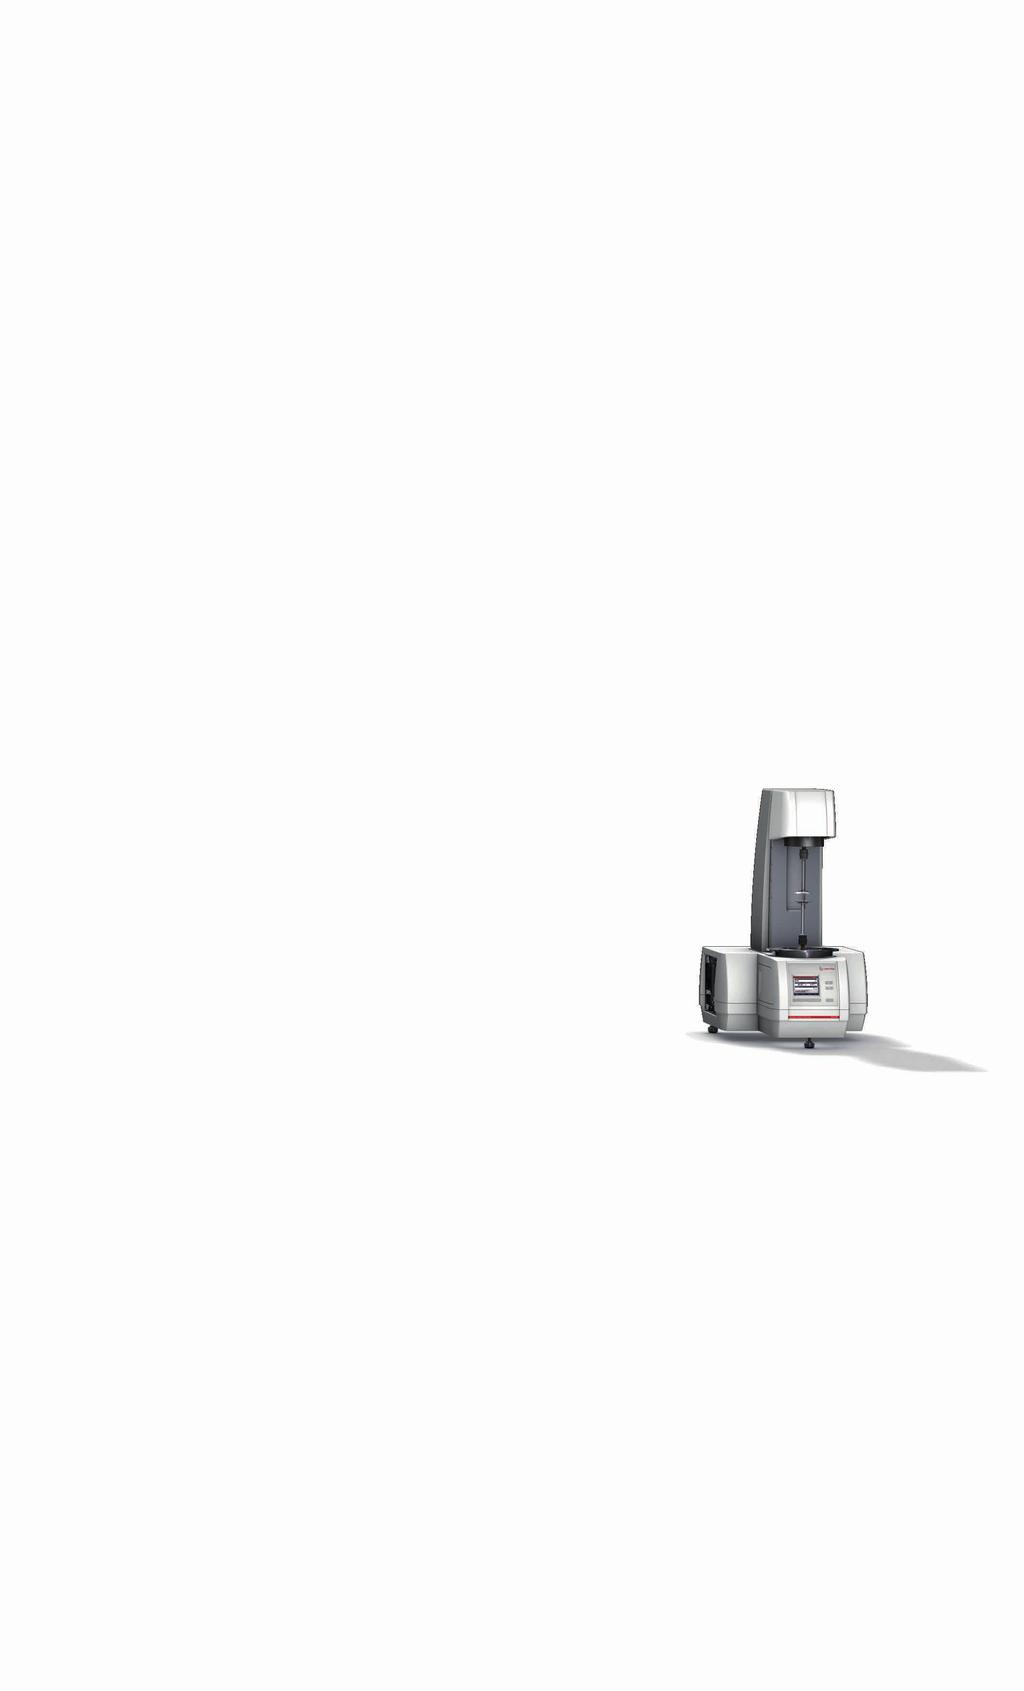 The rheometry revolution: T Anton Paar introduces a groundbreaking high-end rheometer in a class of its own: MCR 702 with T technology.